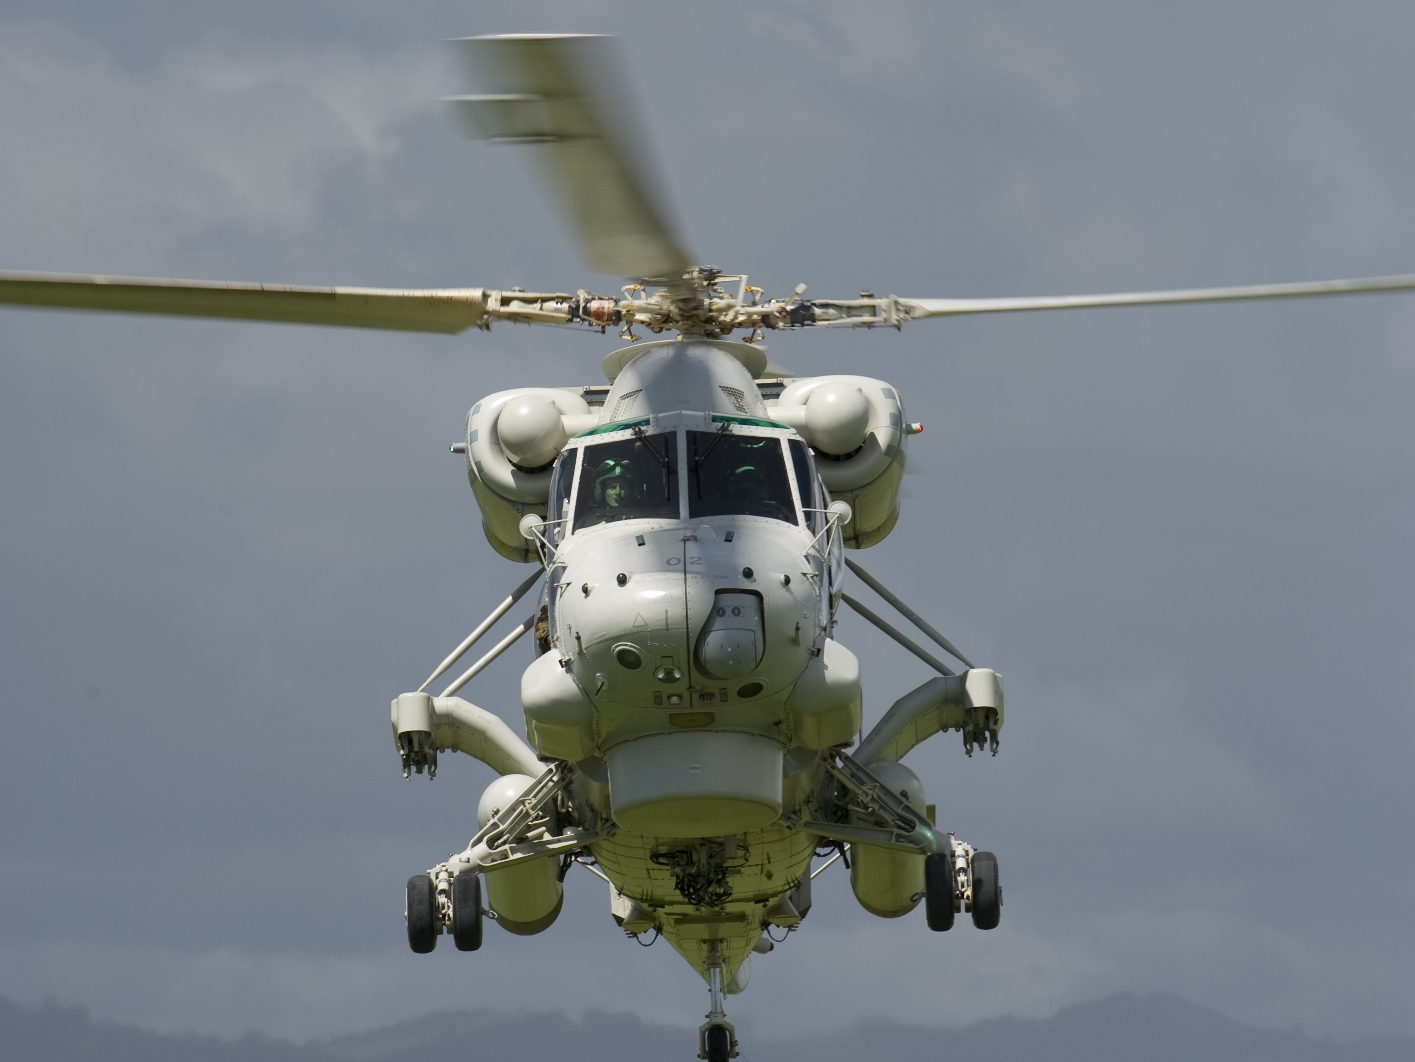 Kaman Awarded $39.8M Contract to Commence Implementation Phase of Peru SH-2G Super Seasprite Program